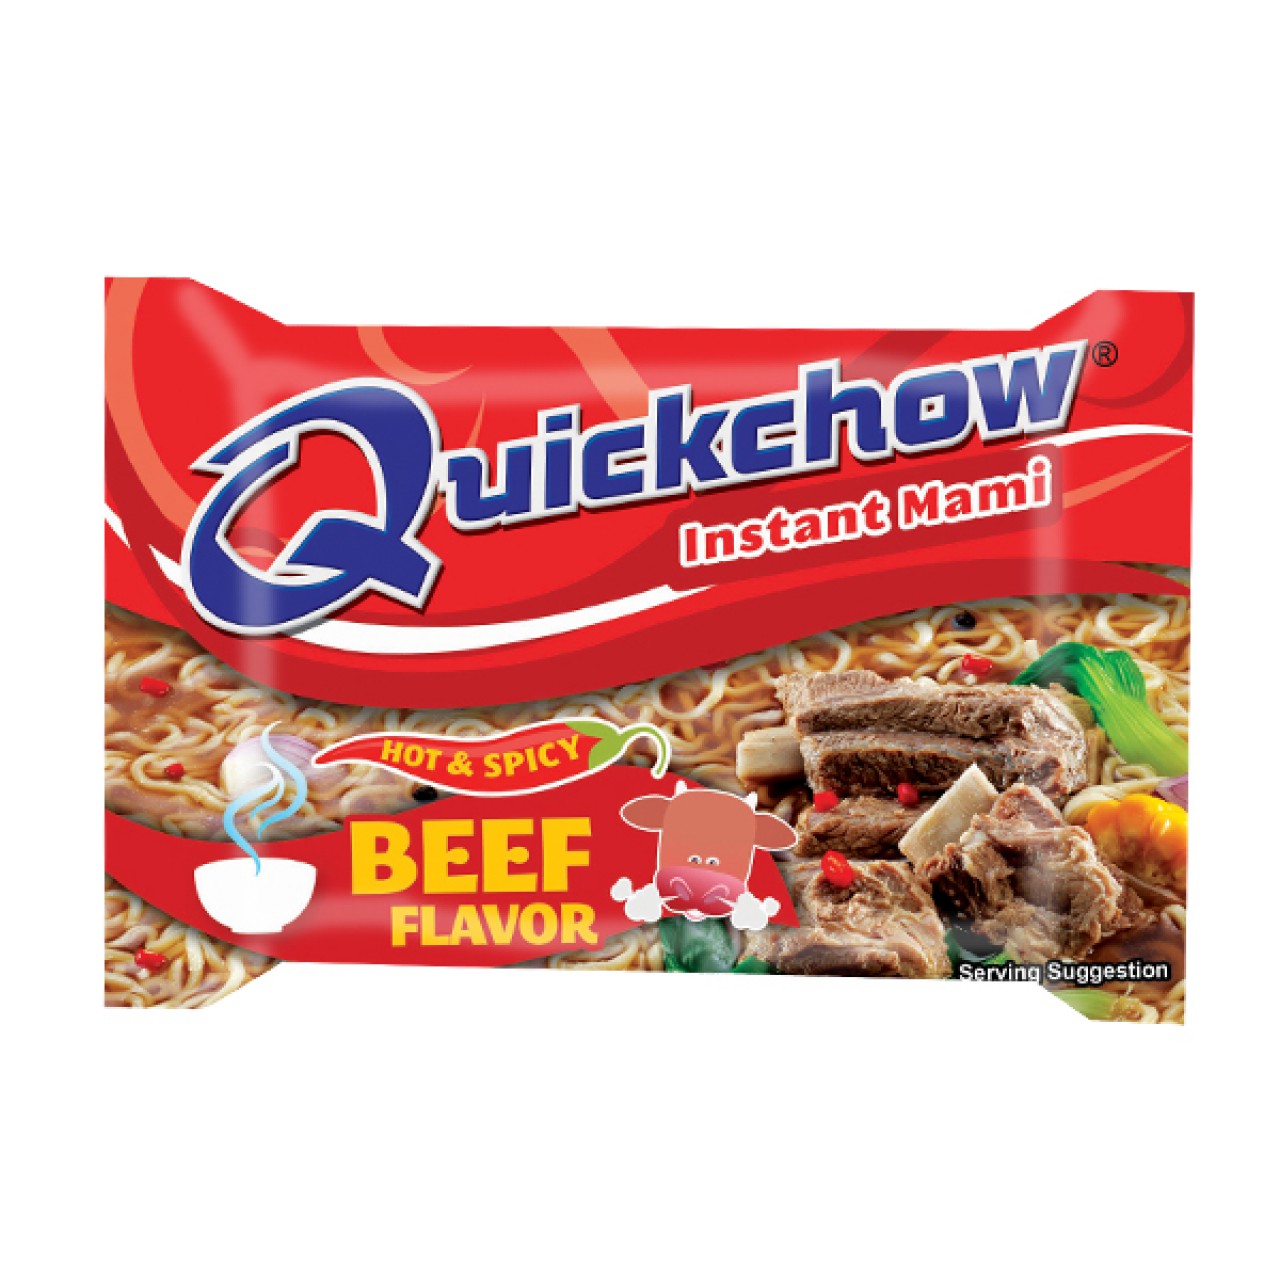 QUICK CHOW INSTANT MAMI HOT & SPICY BEEF 55G